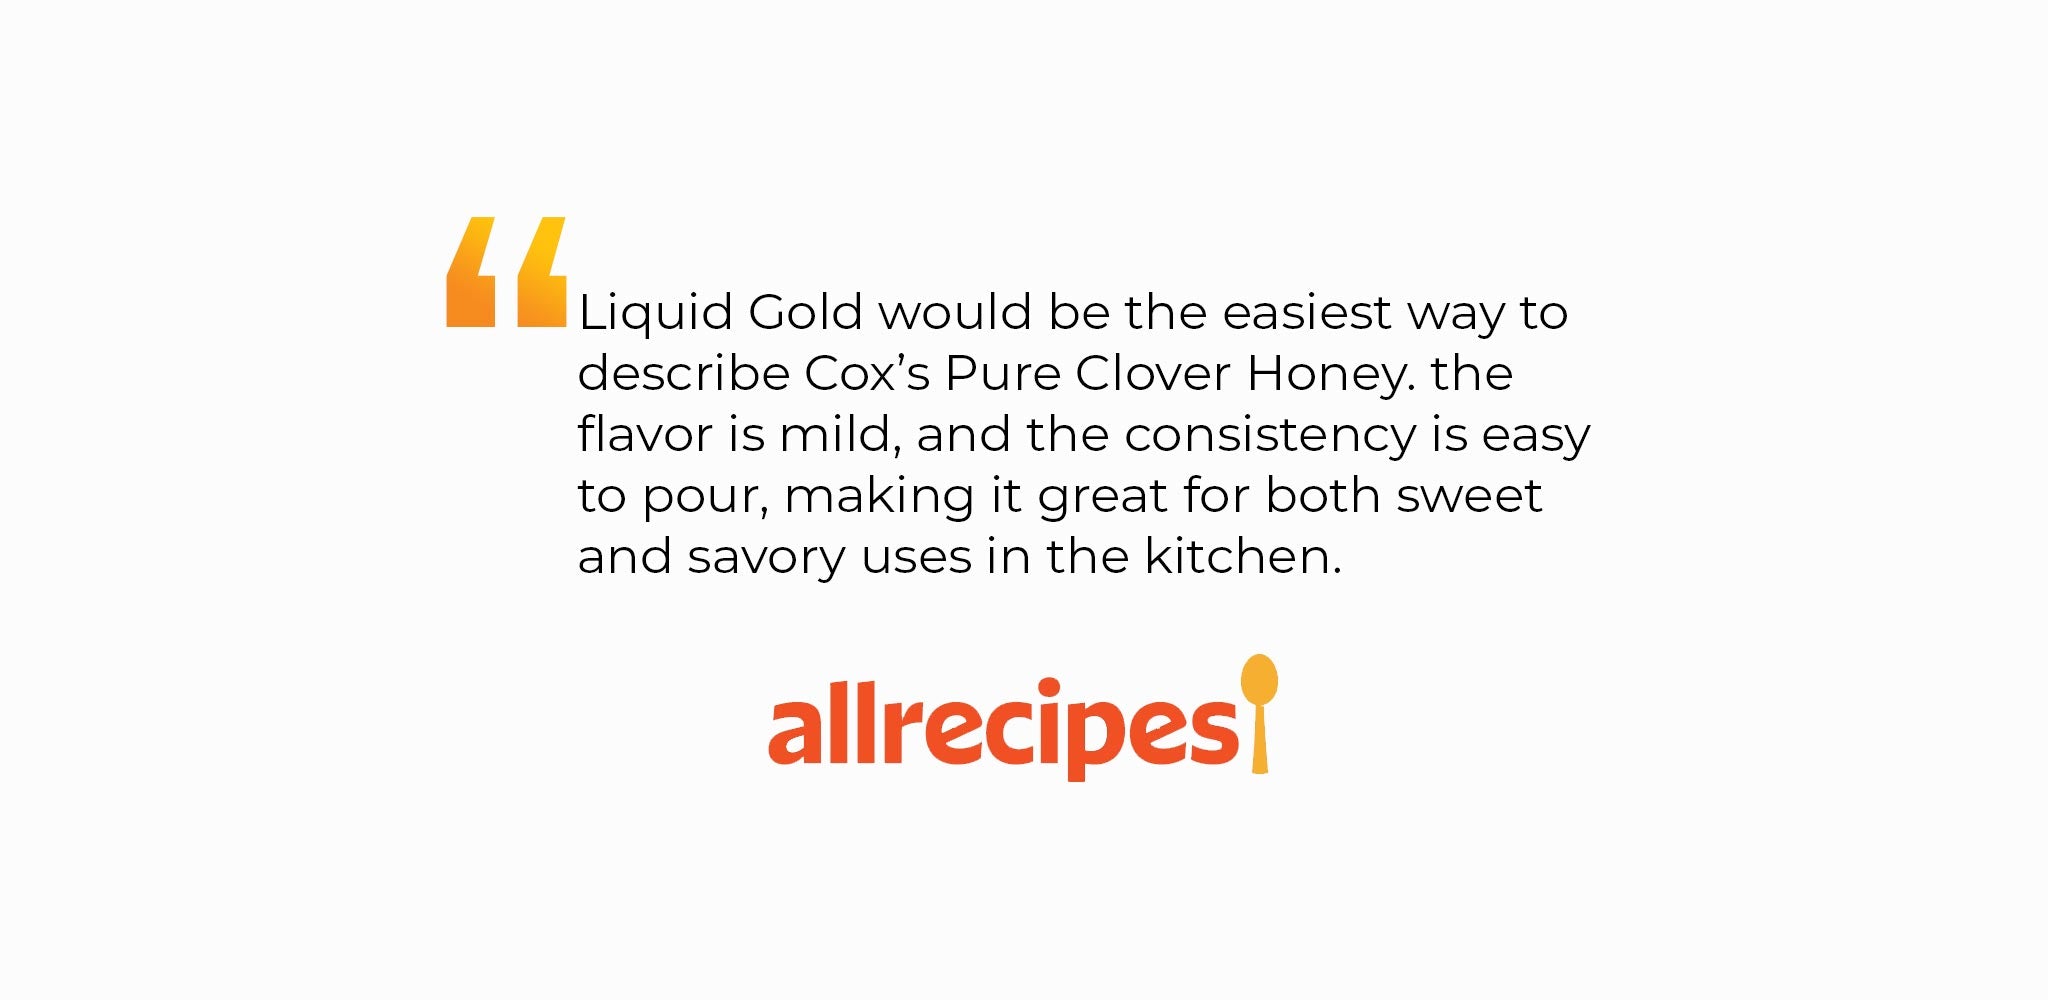 Coxs Honey Allrecipes raw honey review. Liquid Gold would be the easiest way to describe Cox's Pure Clover Honey. The flavor is mild, and the consistency is easy to pour, making it great for both sweet and savory uses in the kitchen.